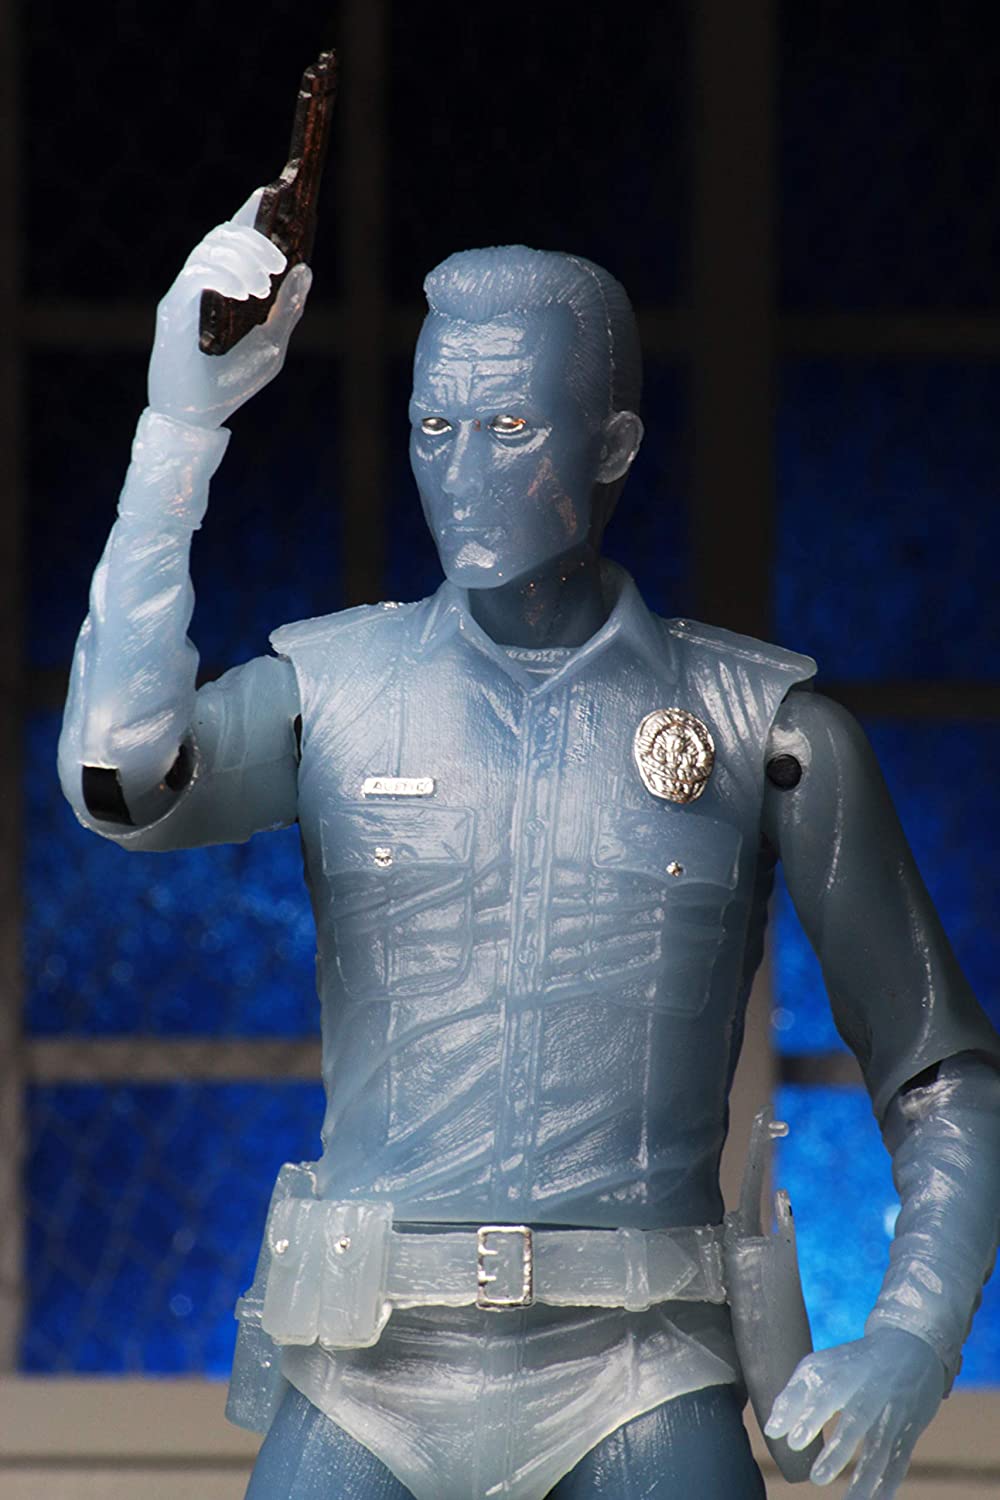 NECA - Terminator 2 - 7" Scale Action Figure - Kenner Tribute - White Hot T-1000